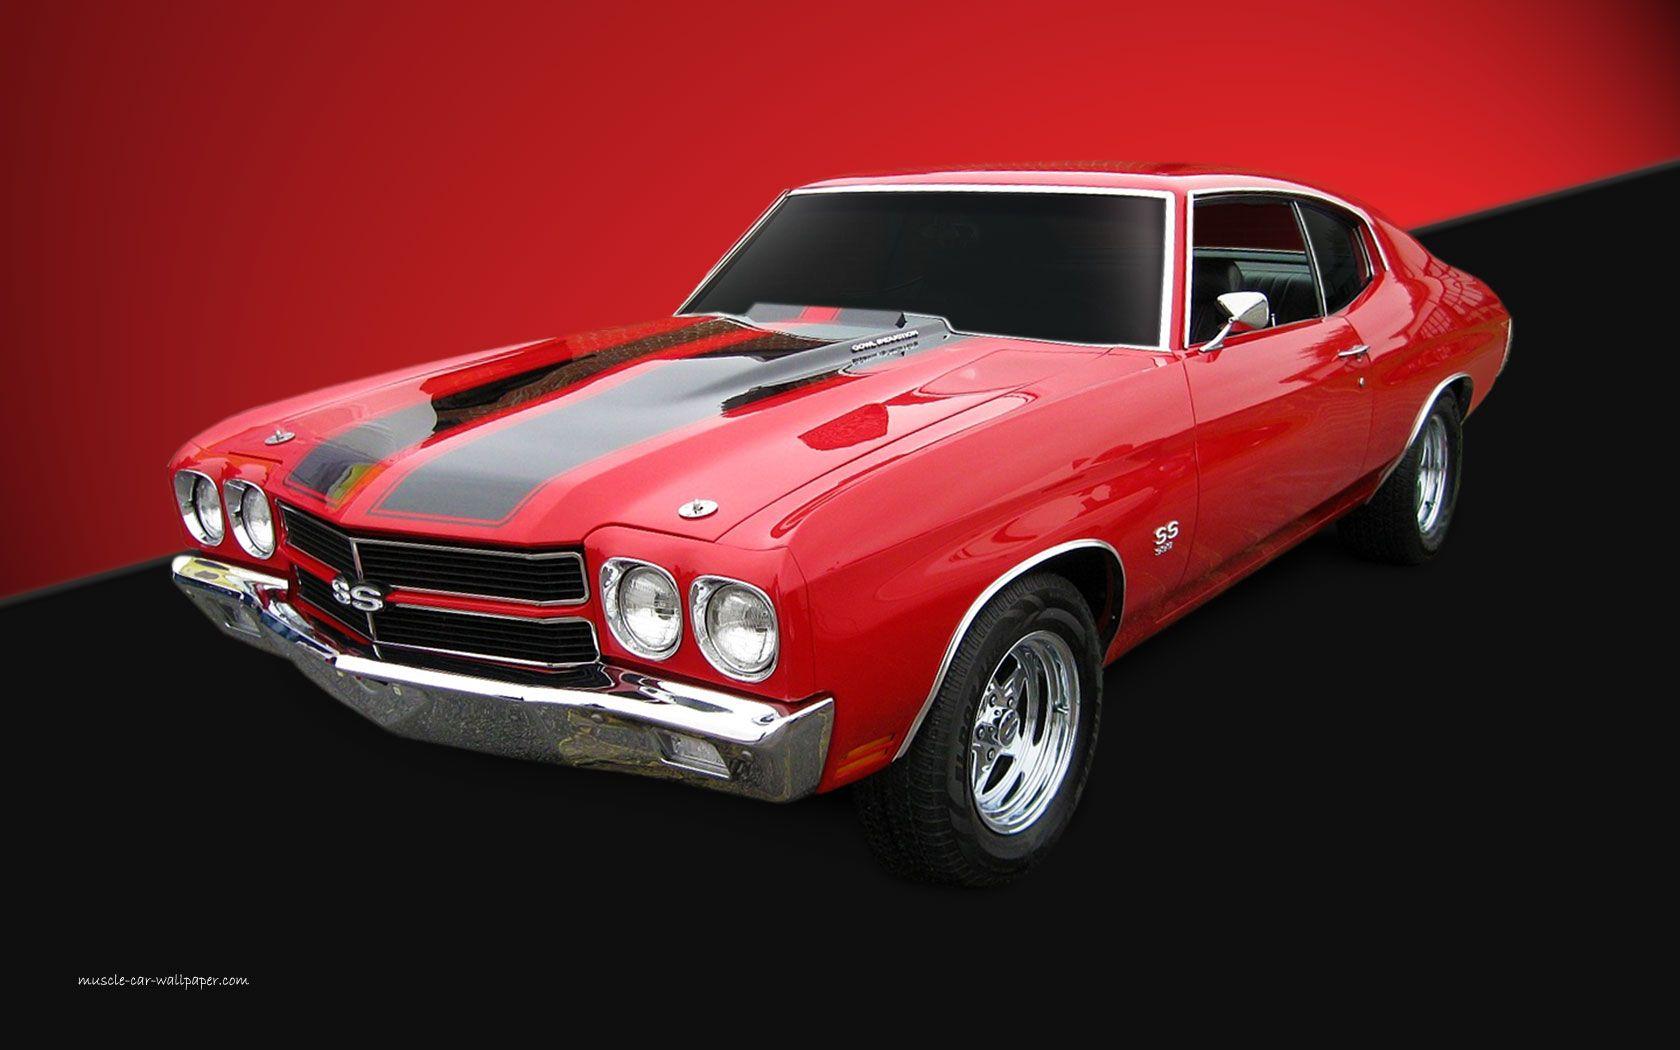 Chevelle SS Wallpaper. Red Coupex1050 06